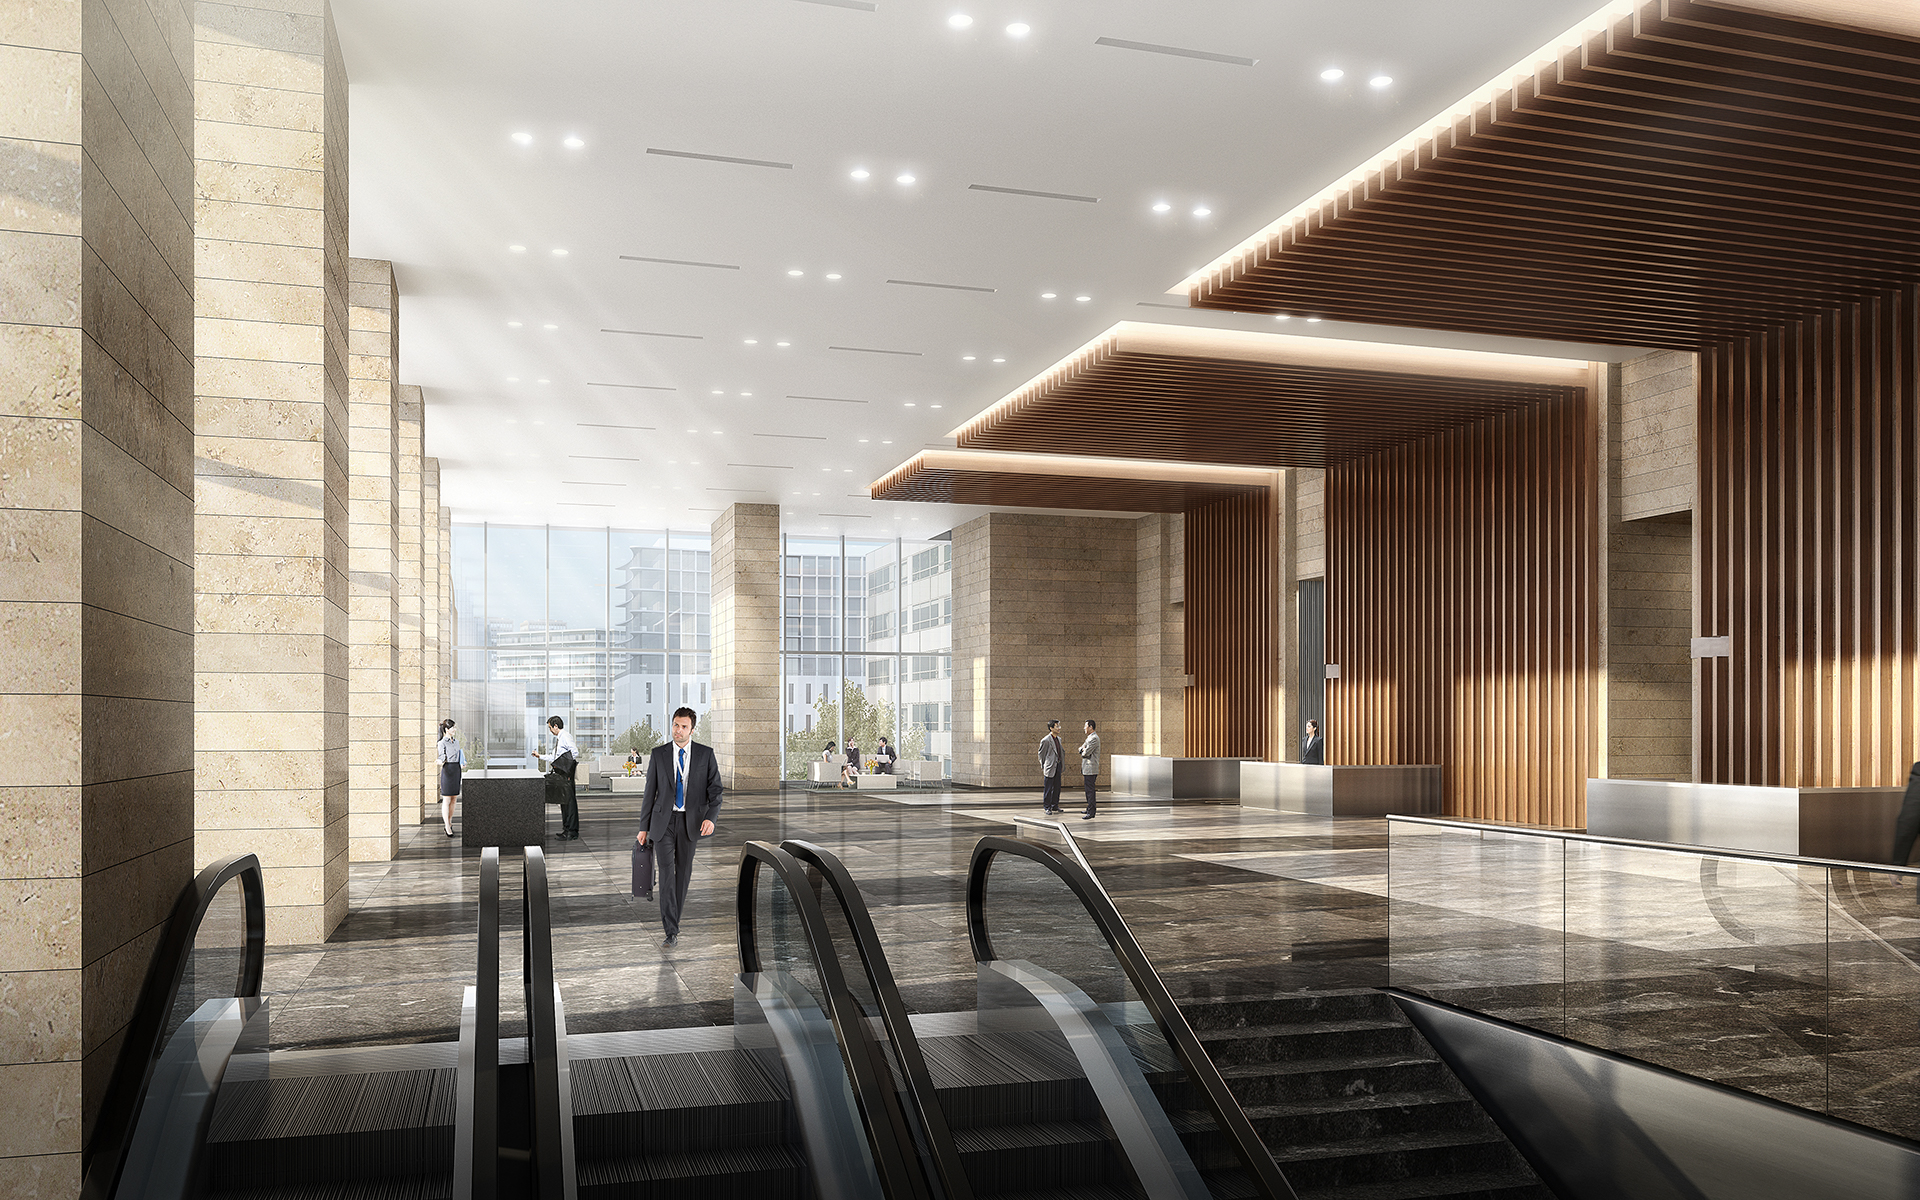 CG rendering of the completed office lobby